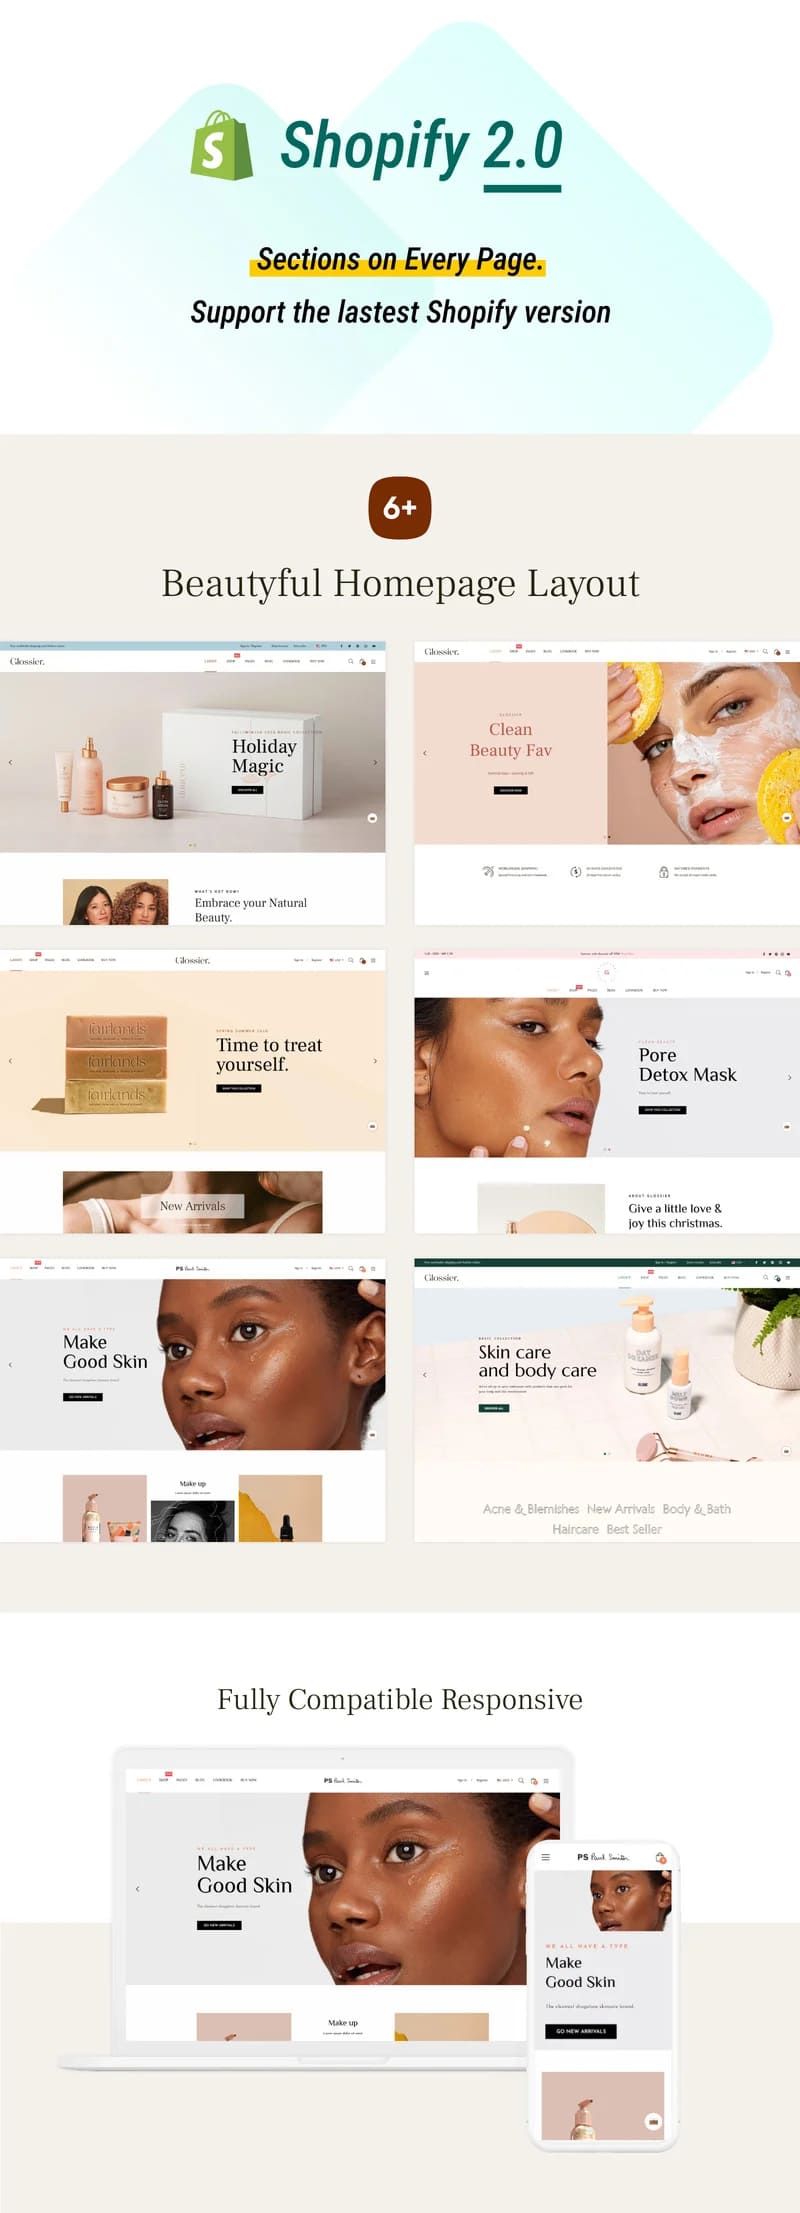 Glossier Shopify Theme: "Sections on Every Page. Support the lastest Shopify version".